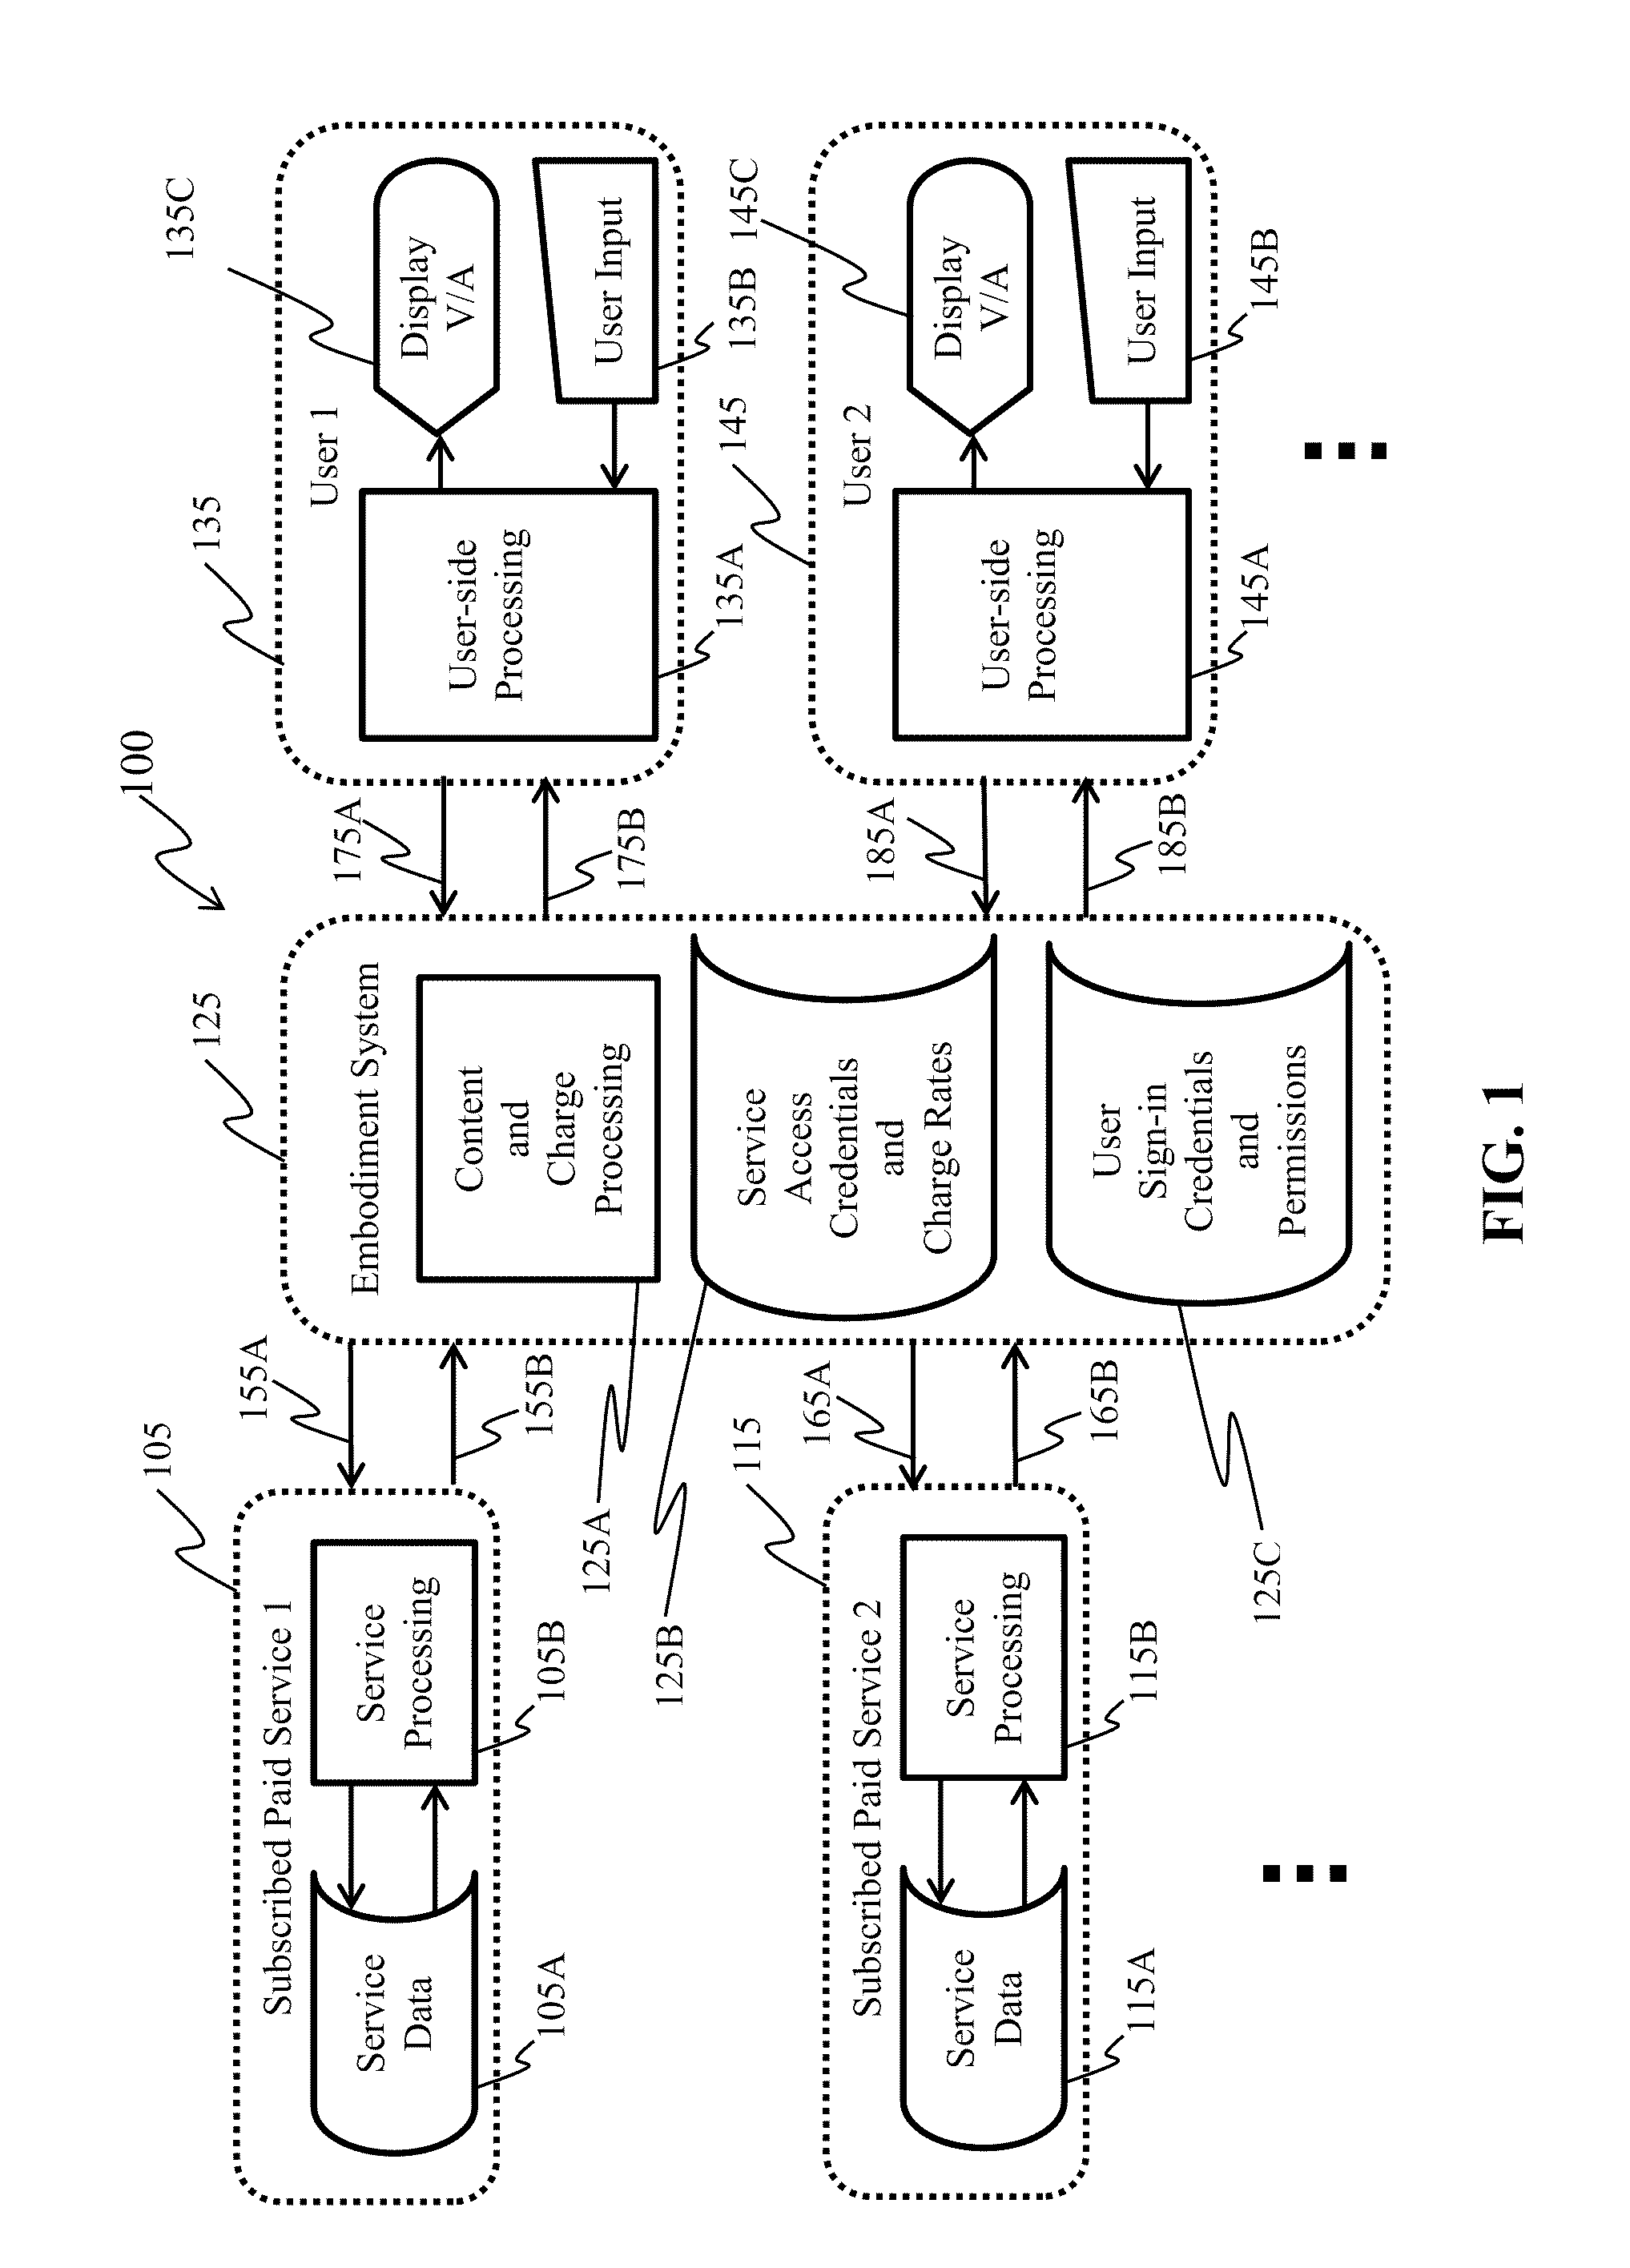 Method and system of serving subscribed contents from multiple sources via a global communications network